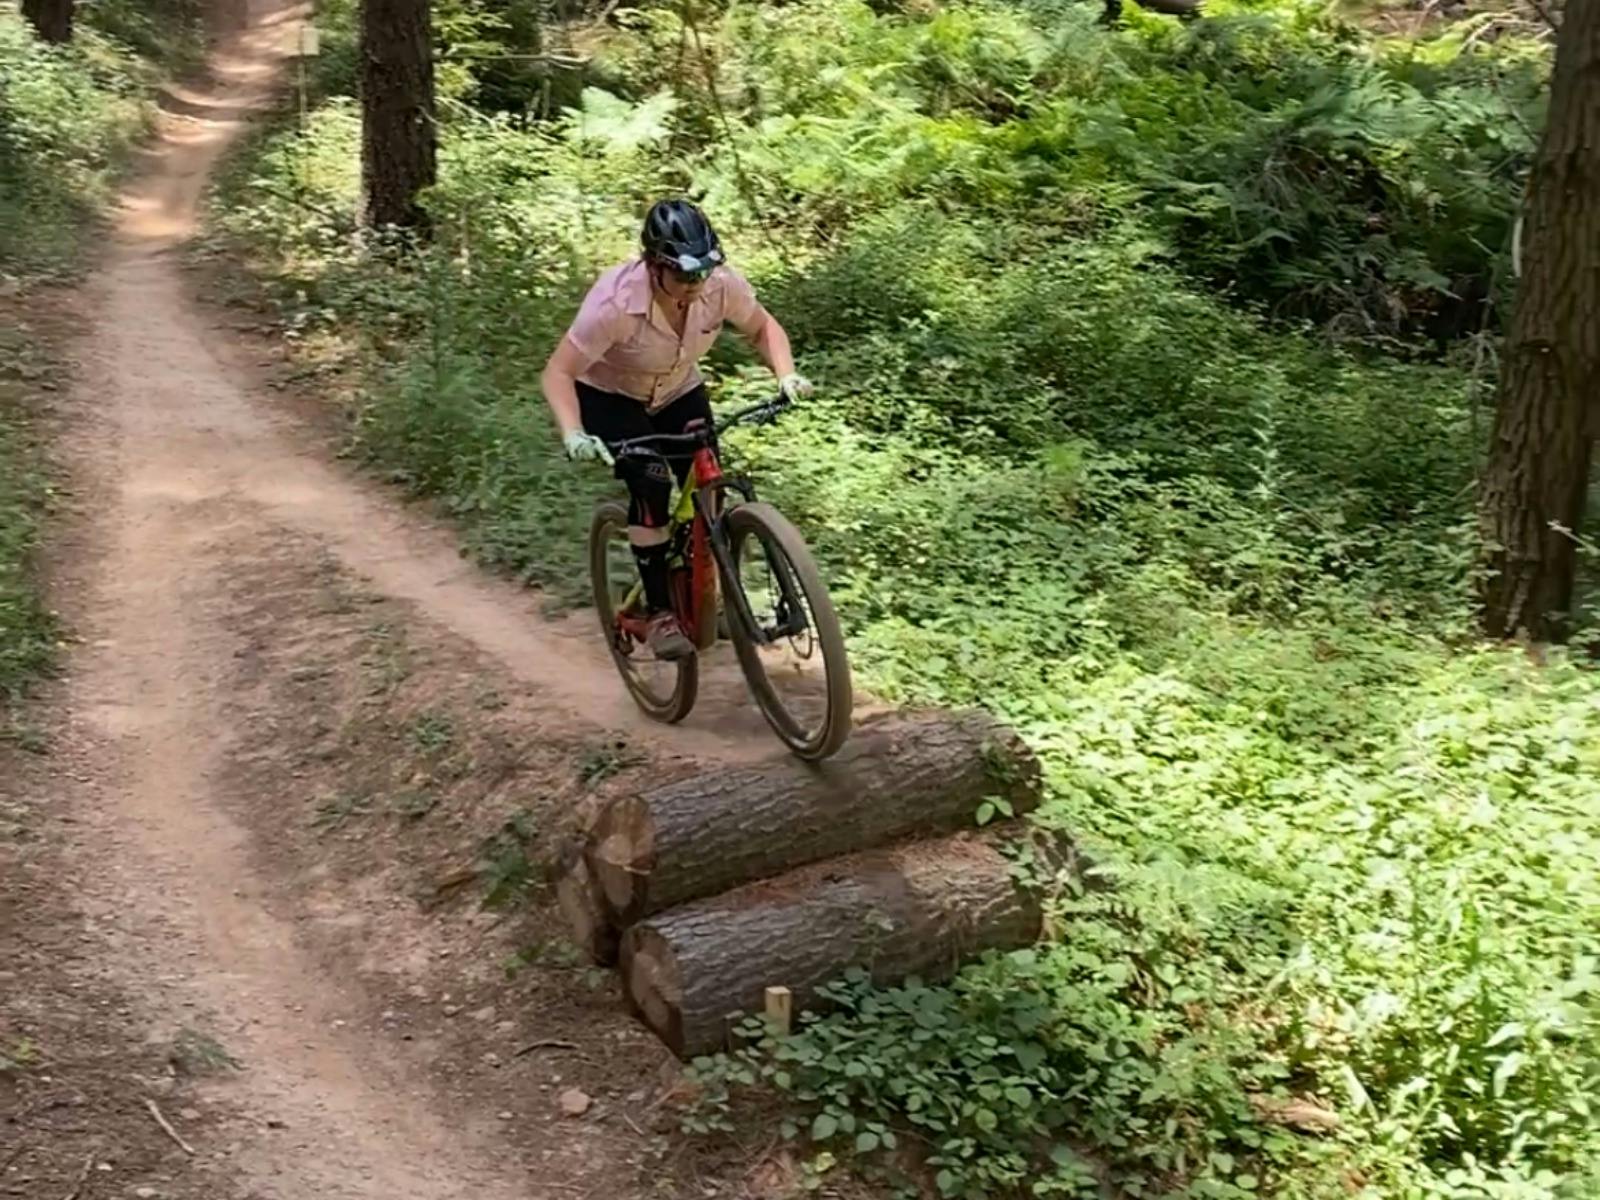 A rider wearing a pink shirt approaches a jump made of logs on a trail.